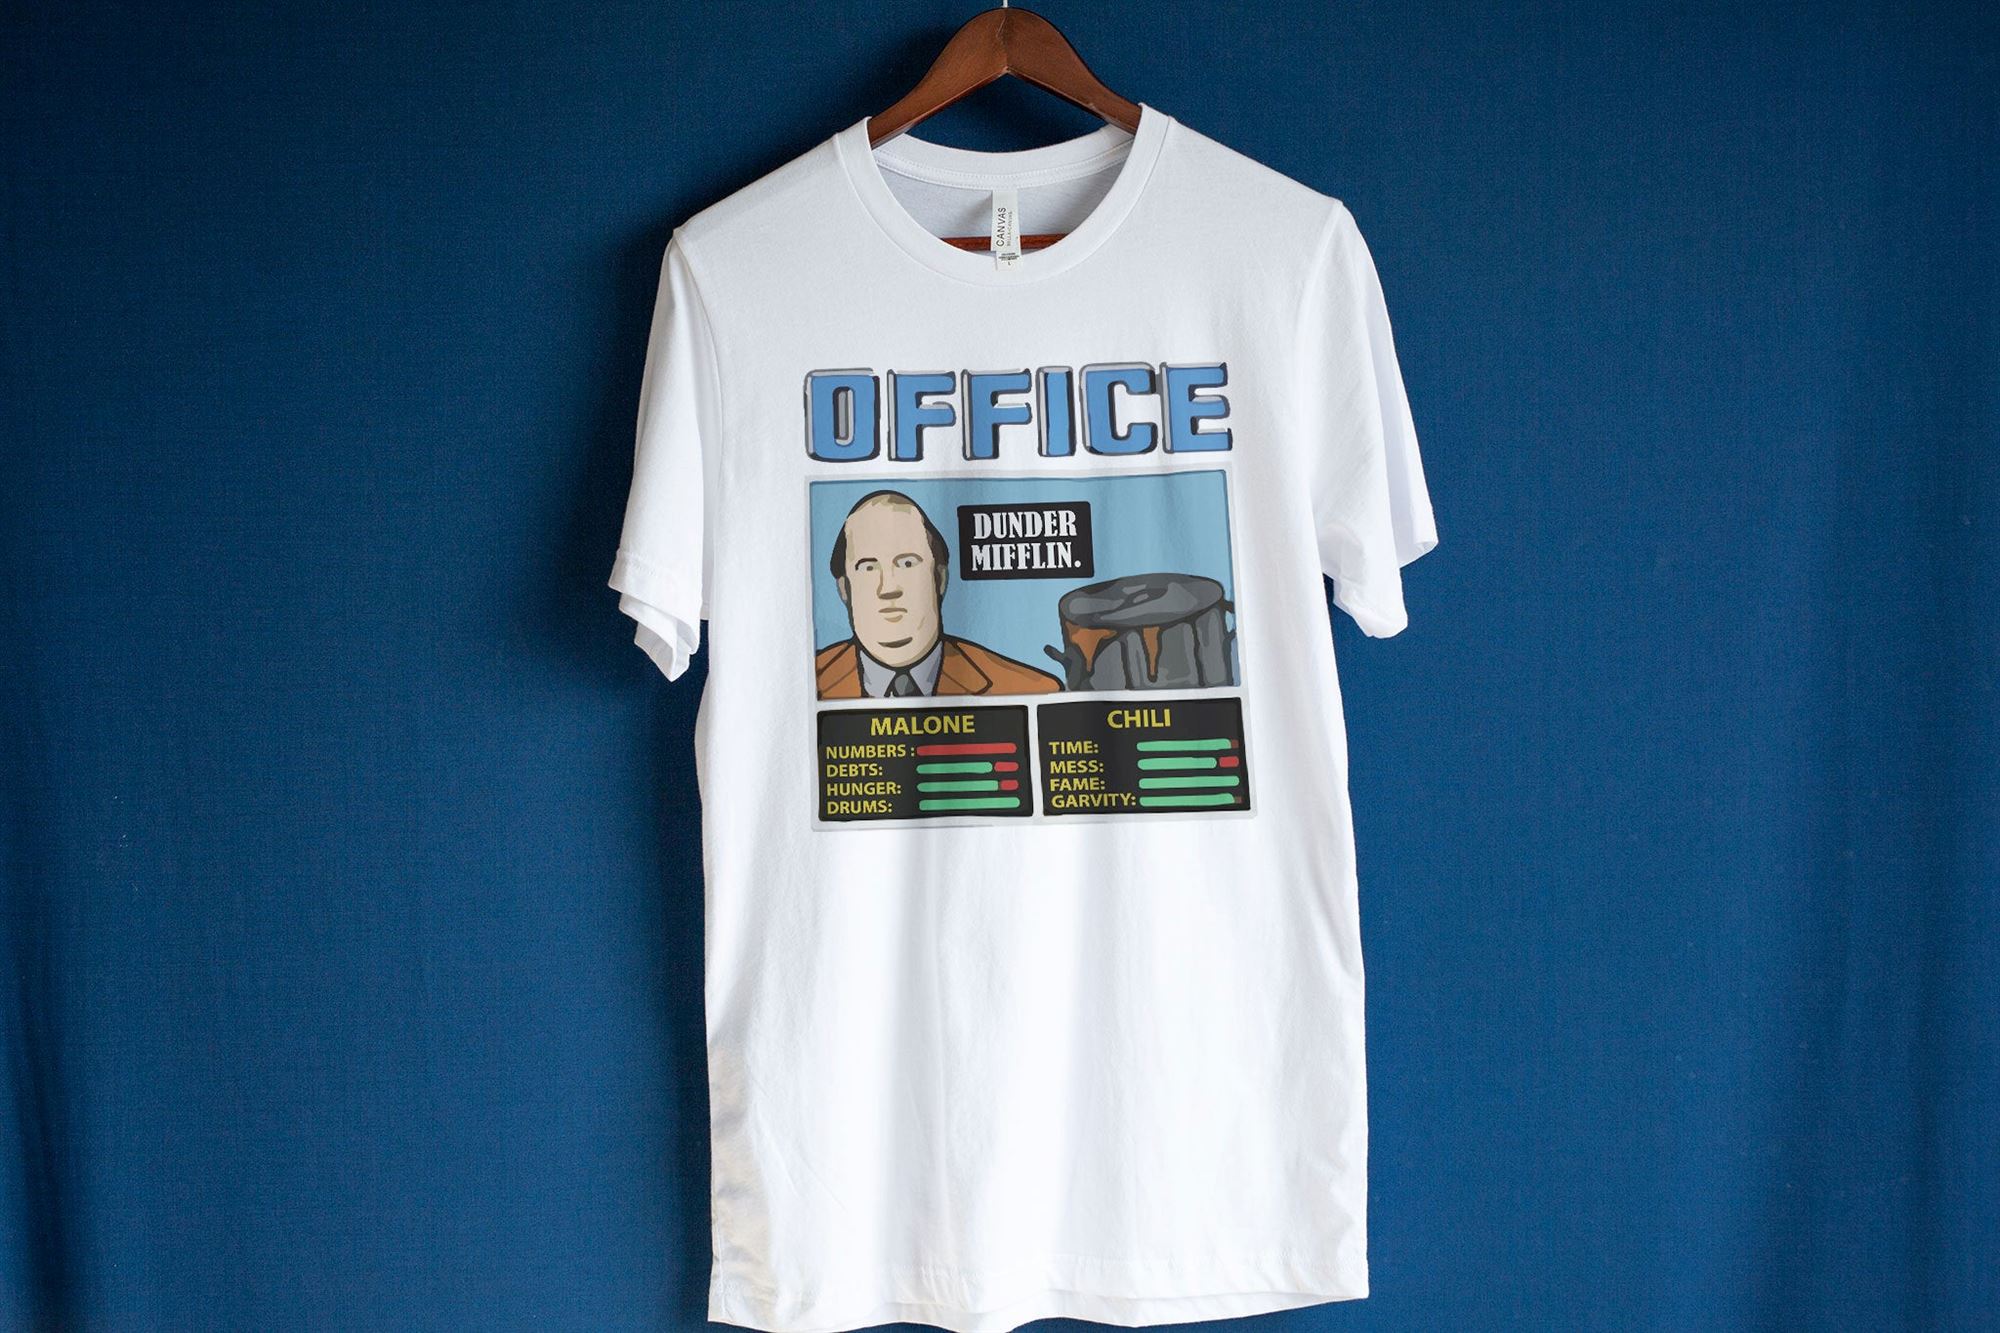 Aaron Rodgers The Office Malone Chilli T-shirt Aaron Rodgers Office Shirt Kevin Malone Chili Shirt